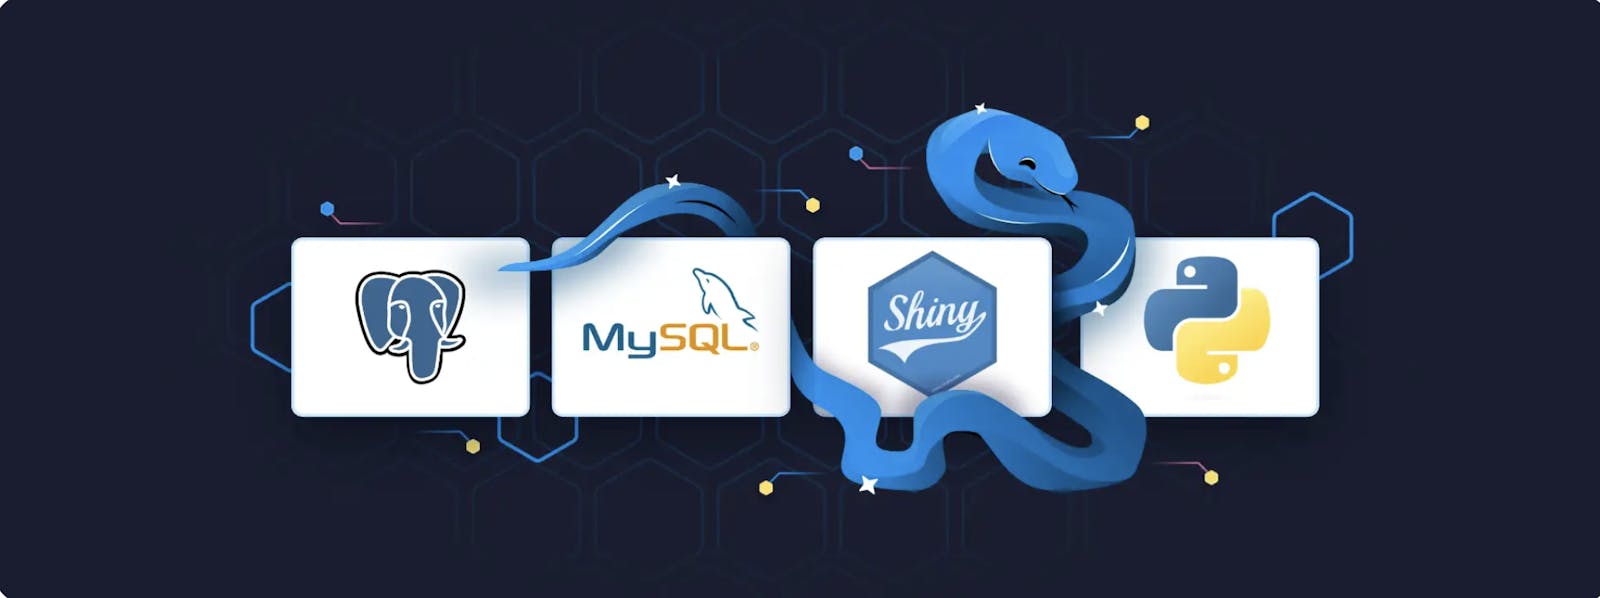 Shiny for Python: How to Work With MySQL and Postgres Databases